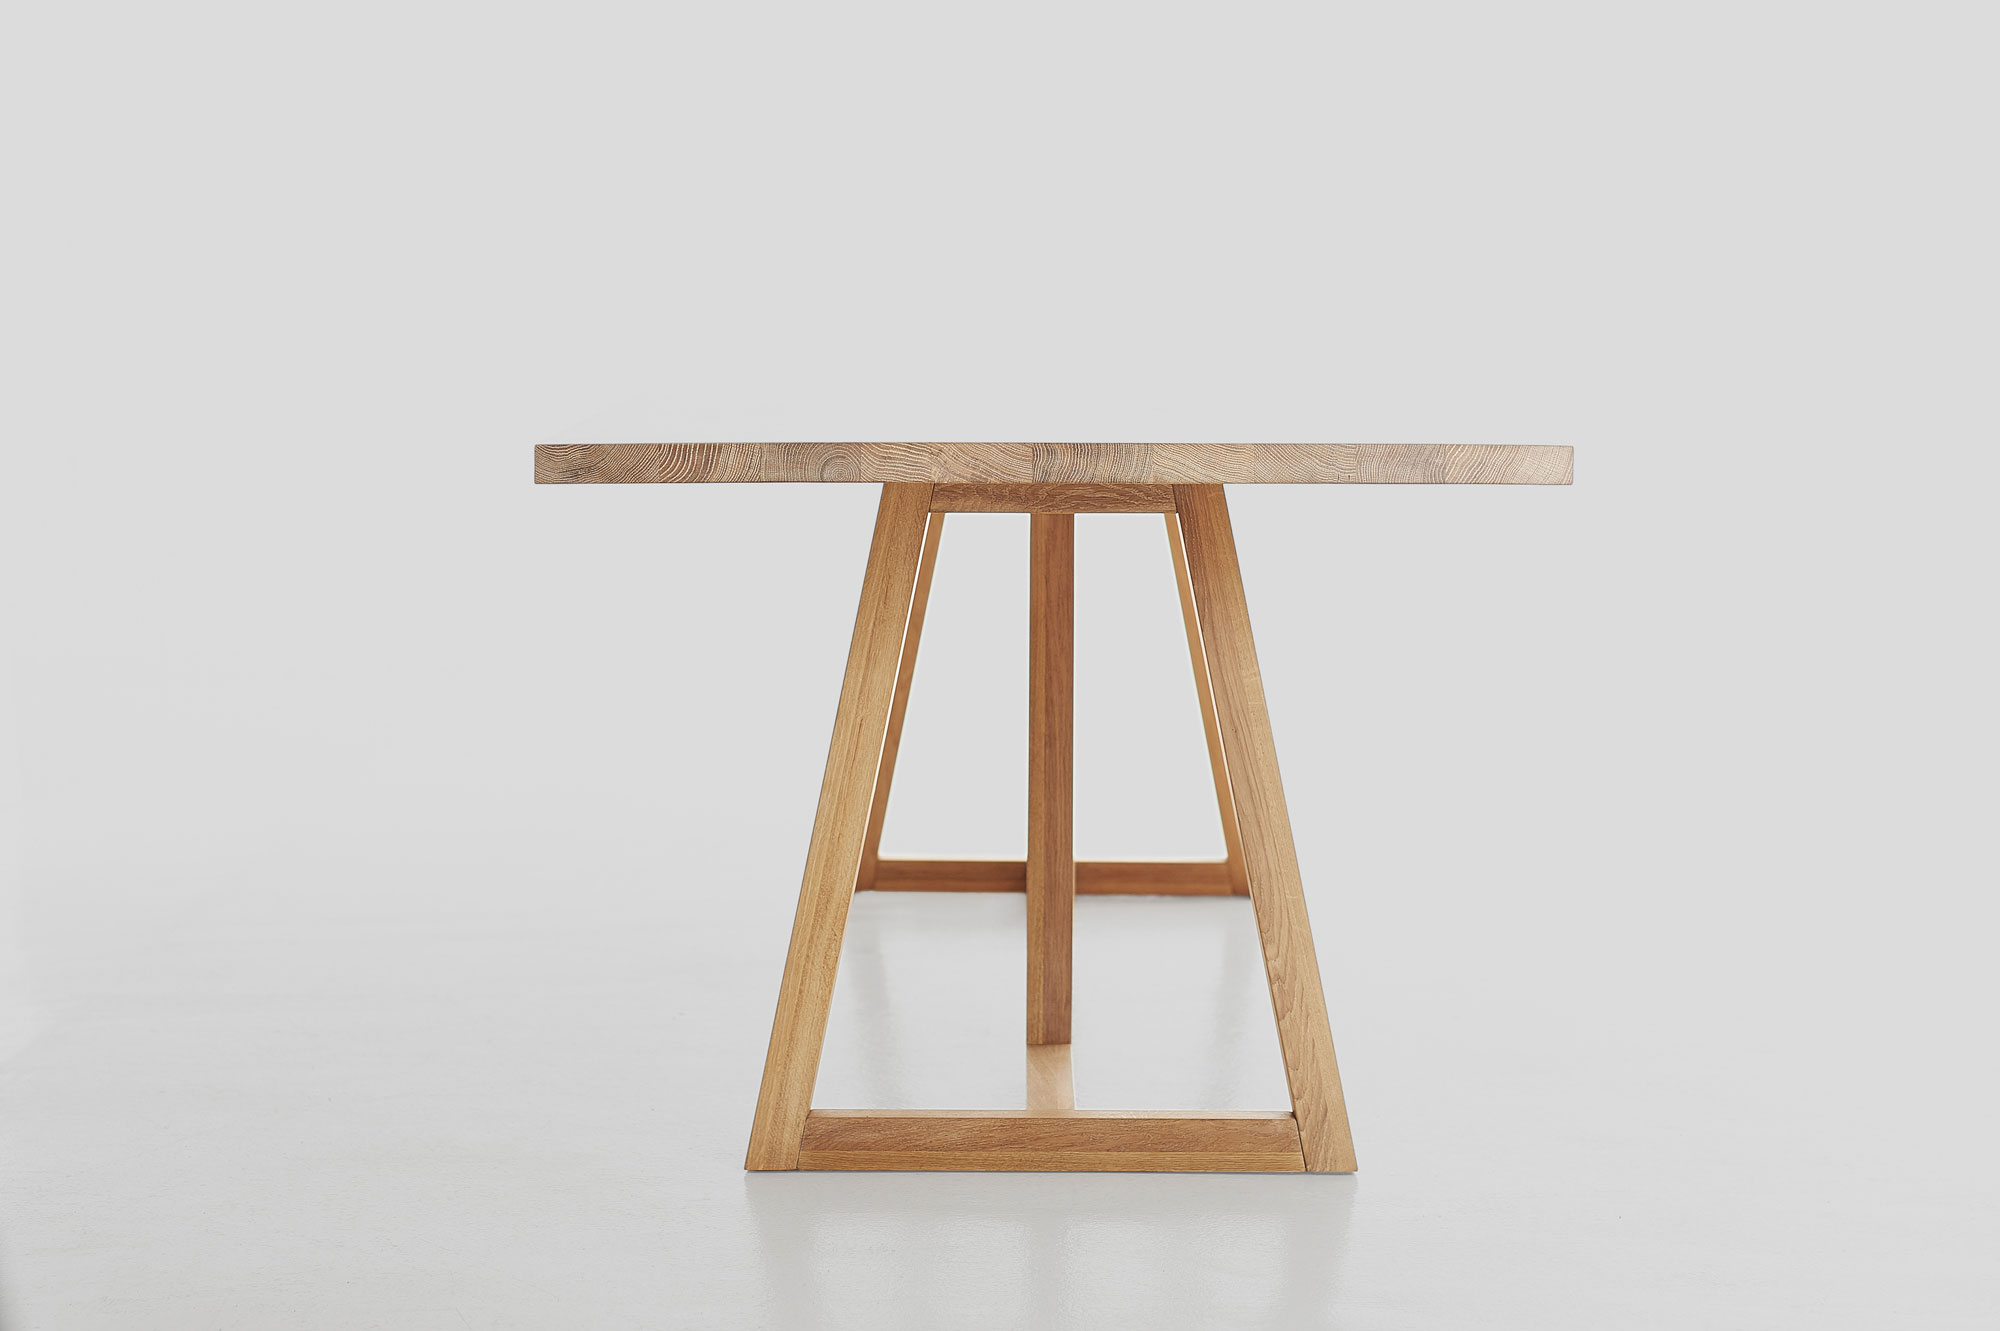 Designer Solid Wood Table MARGO 0392 custom made in solid wood by vitamin design